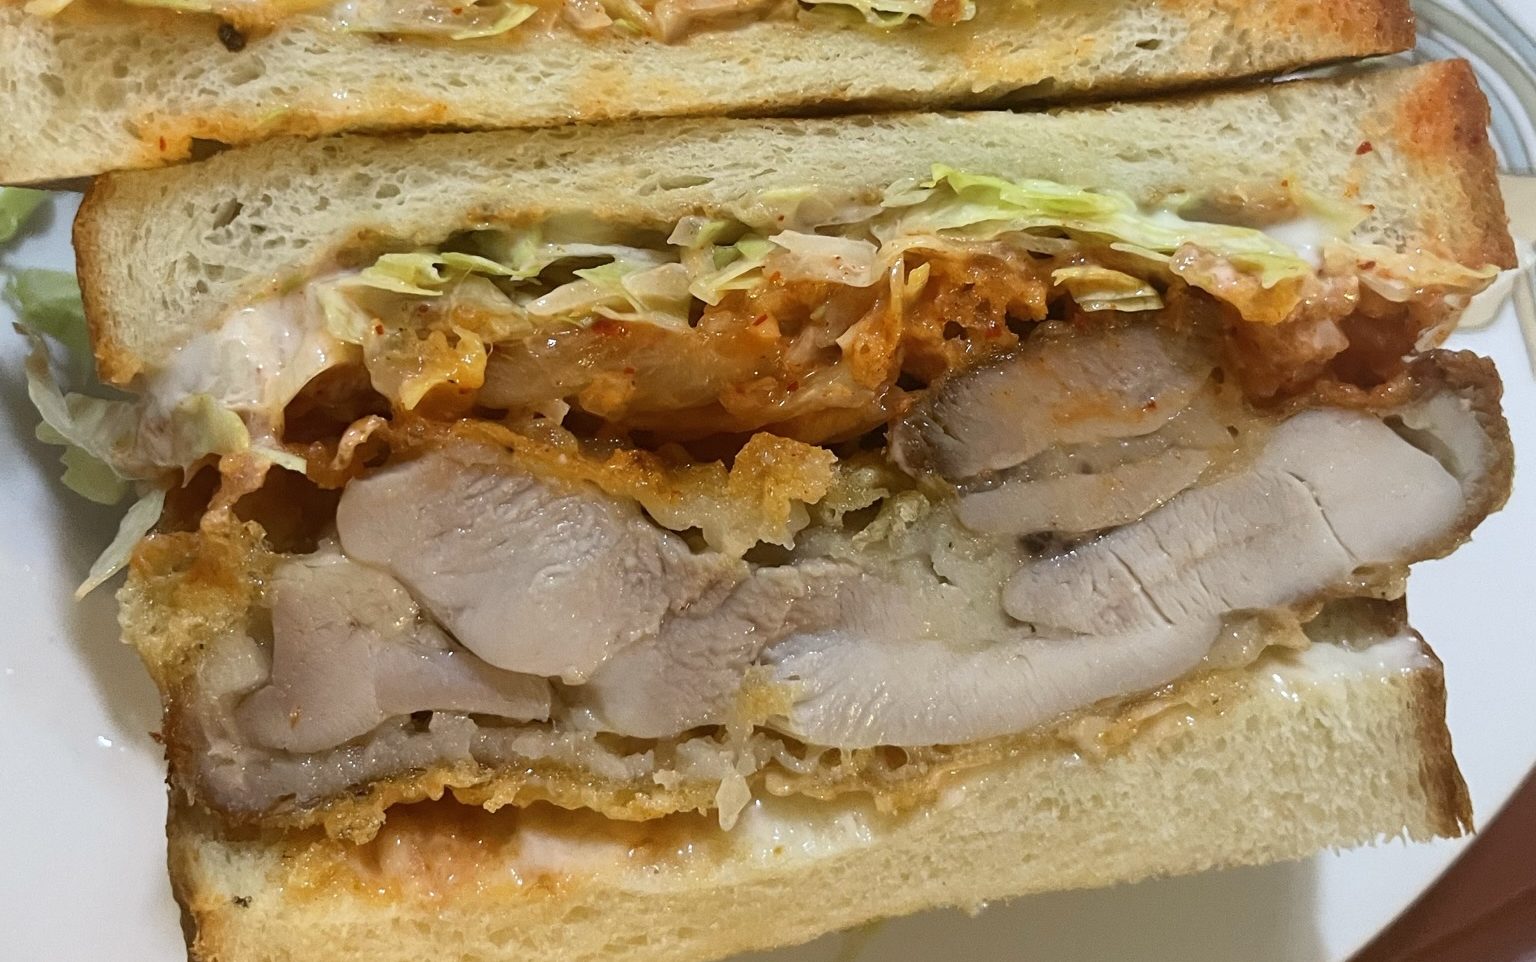 Crunchy and juicy korean fried chicken with kimchi, mayo and lettuce sandwiched between 2 slices of soft milkbread